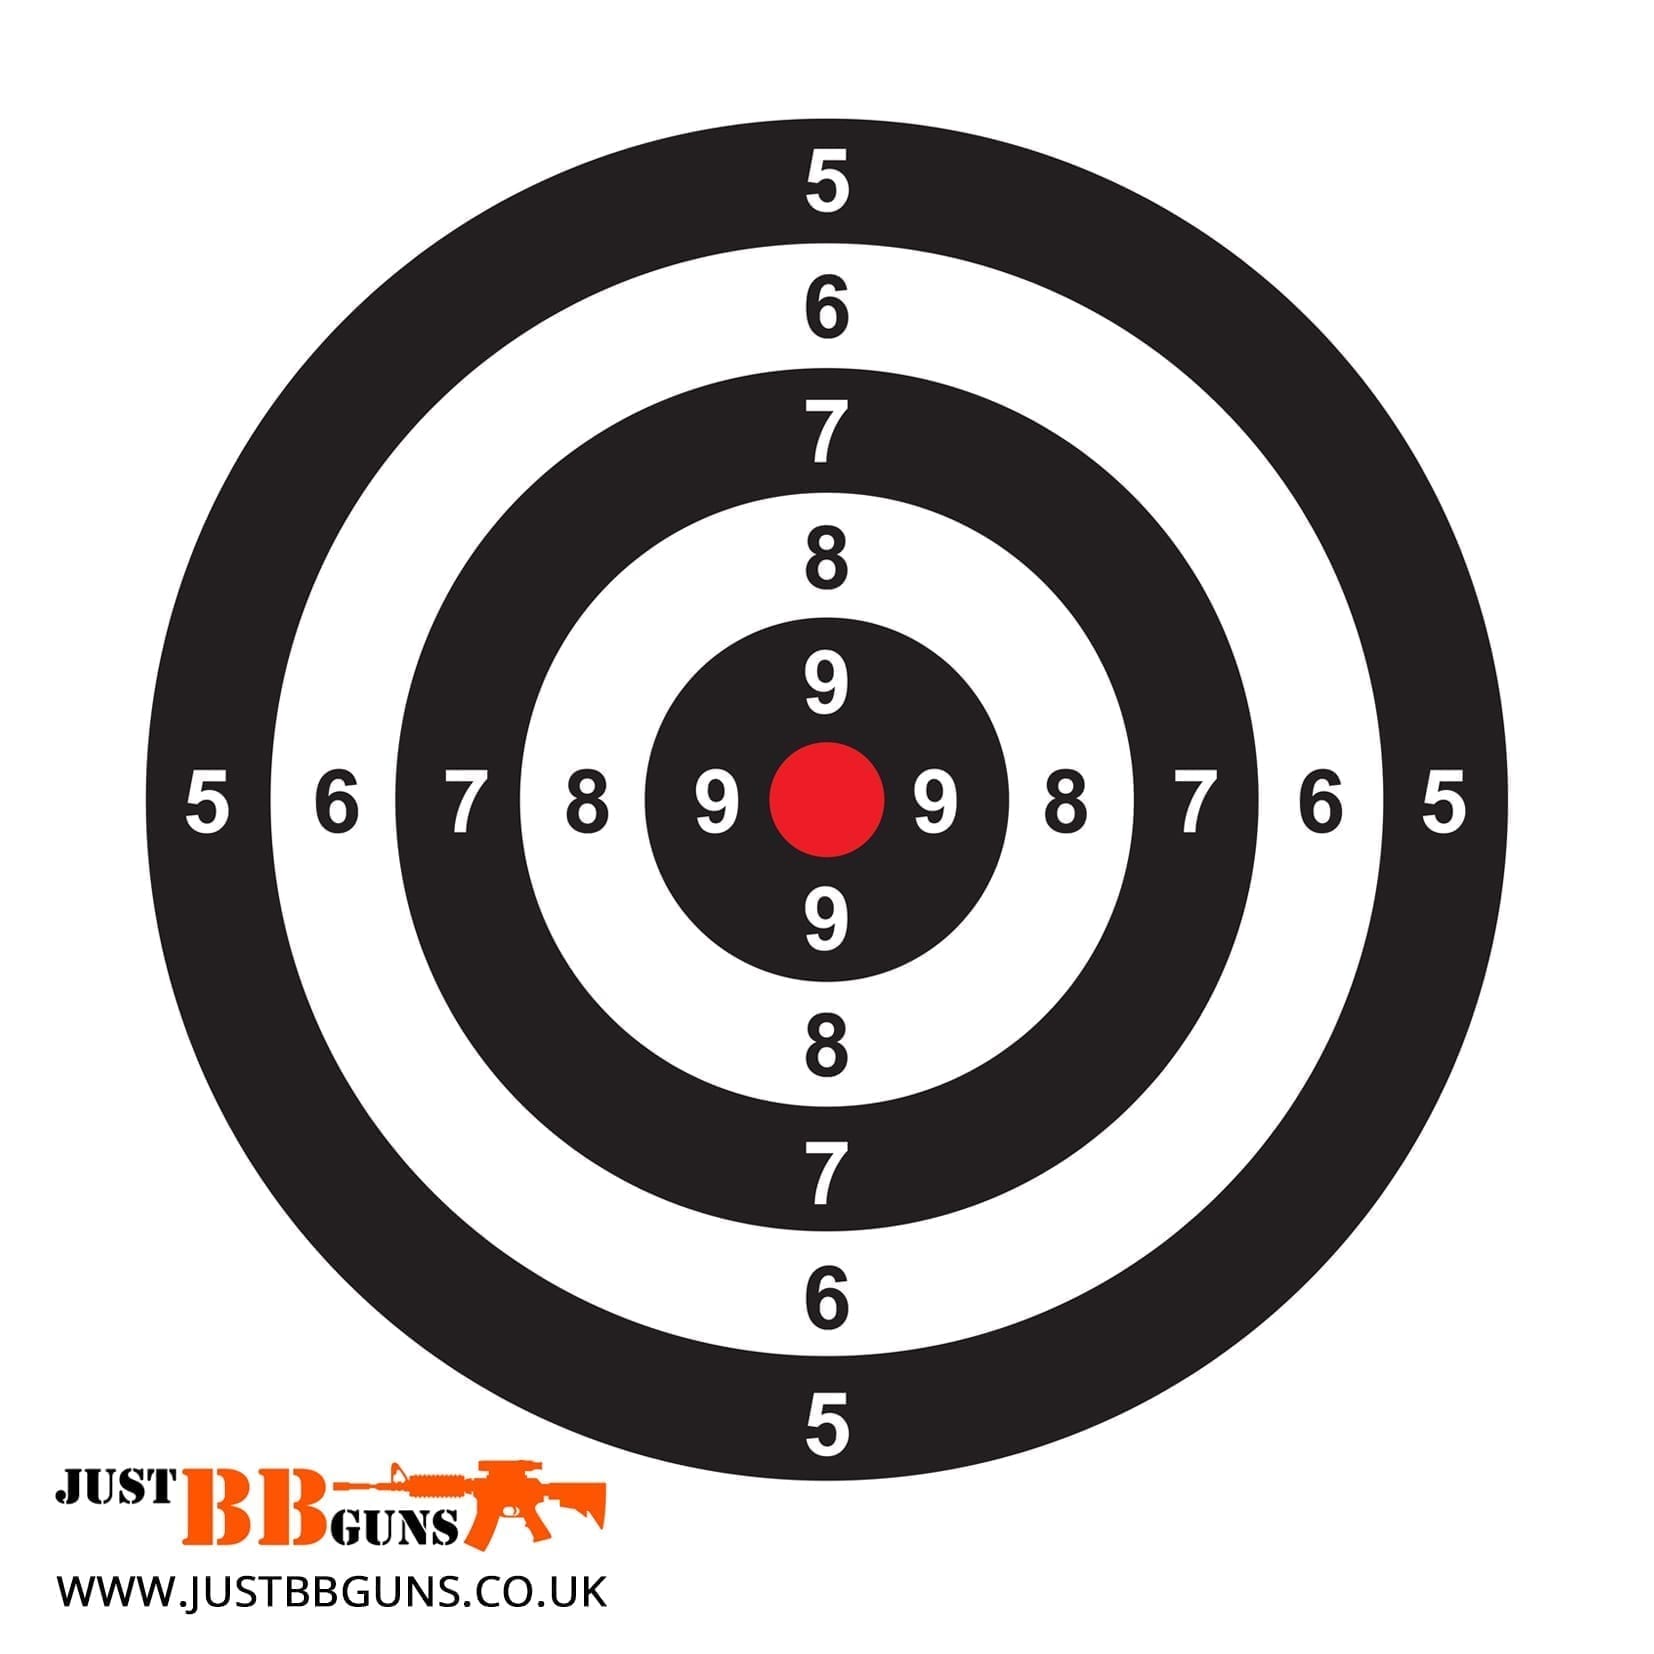 Free Targets Just Bb Guns Airsoft Targets To Download And Print